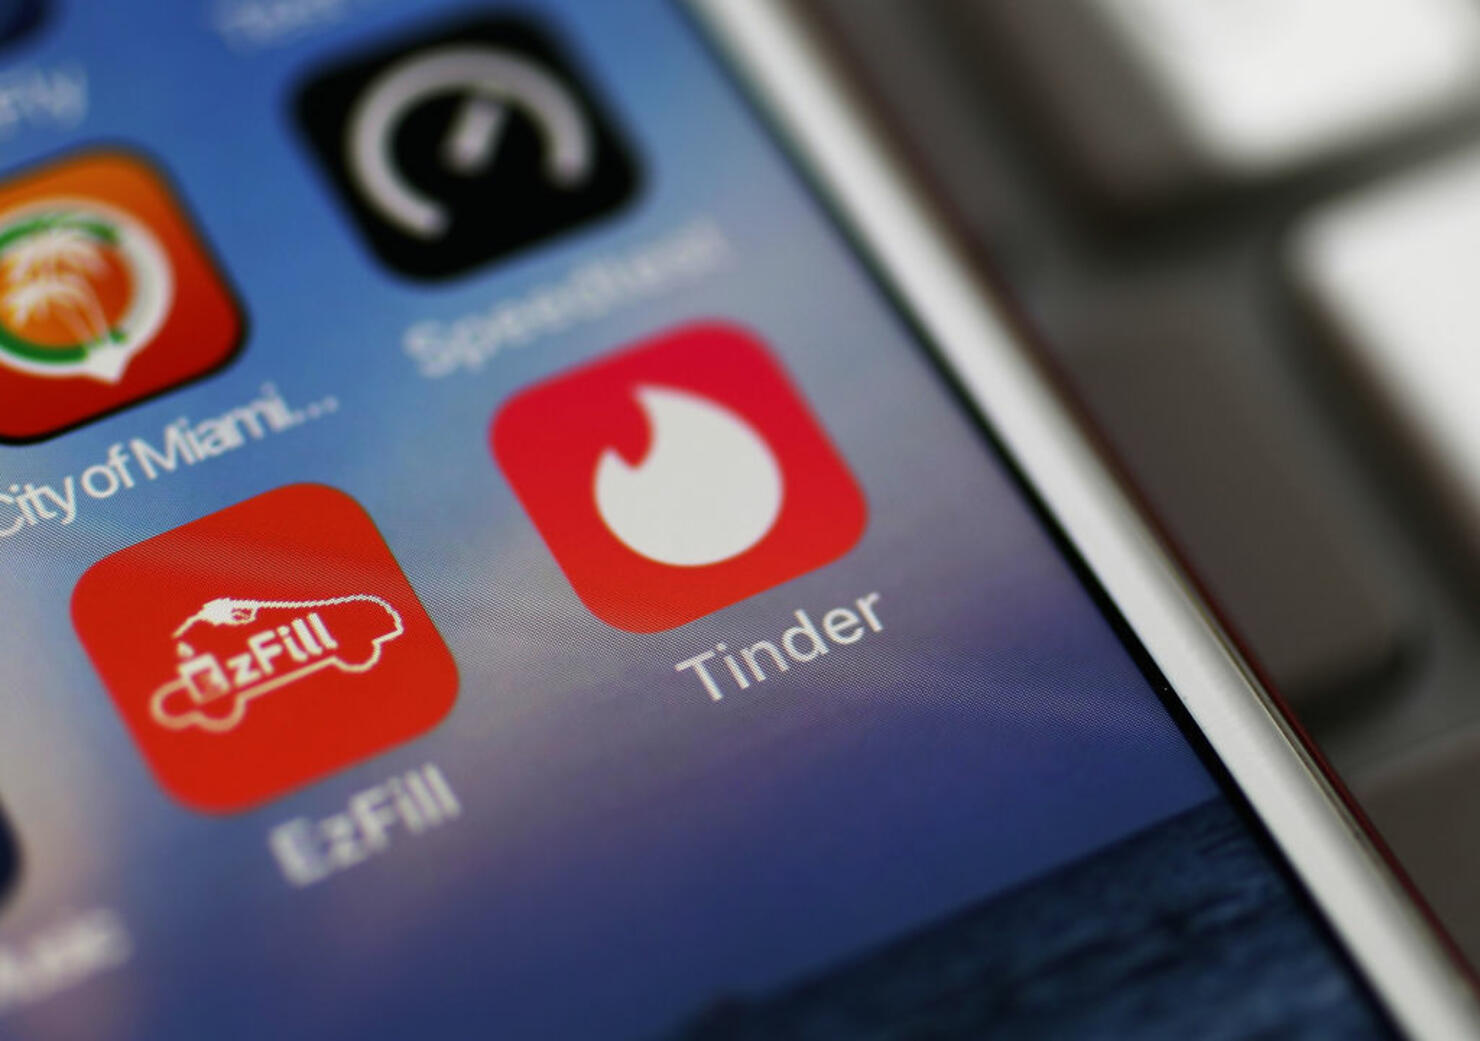 Tinder introduces new height verification feature on its app